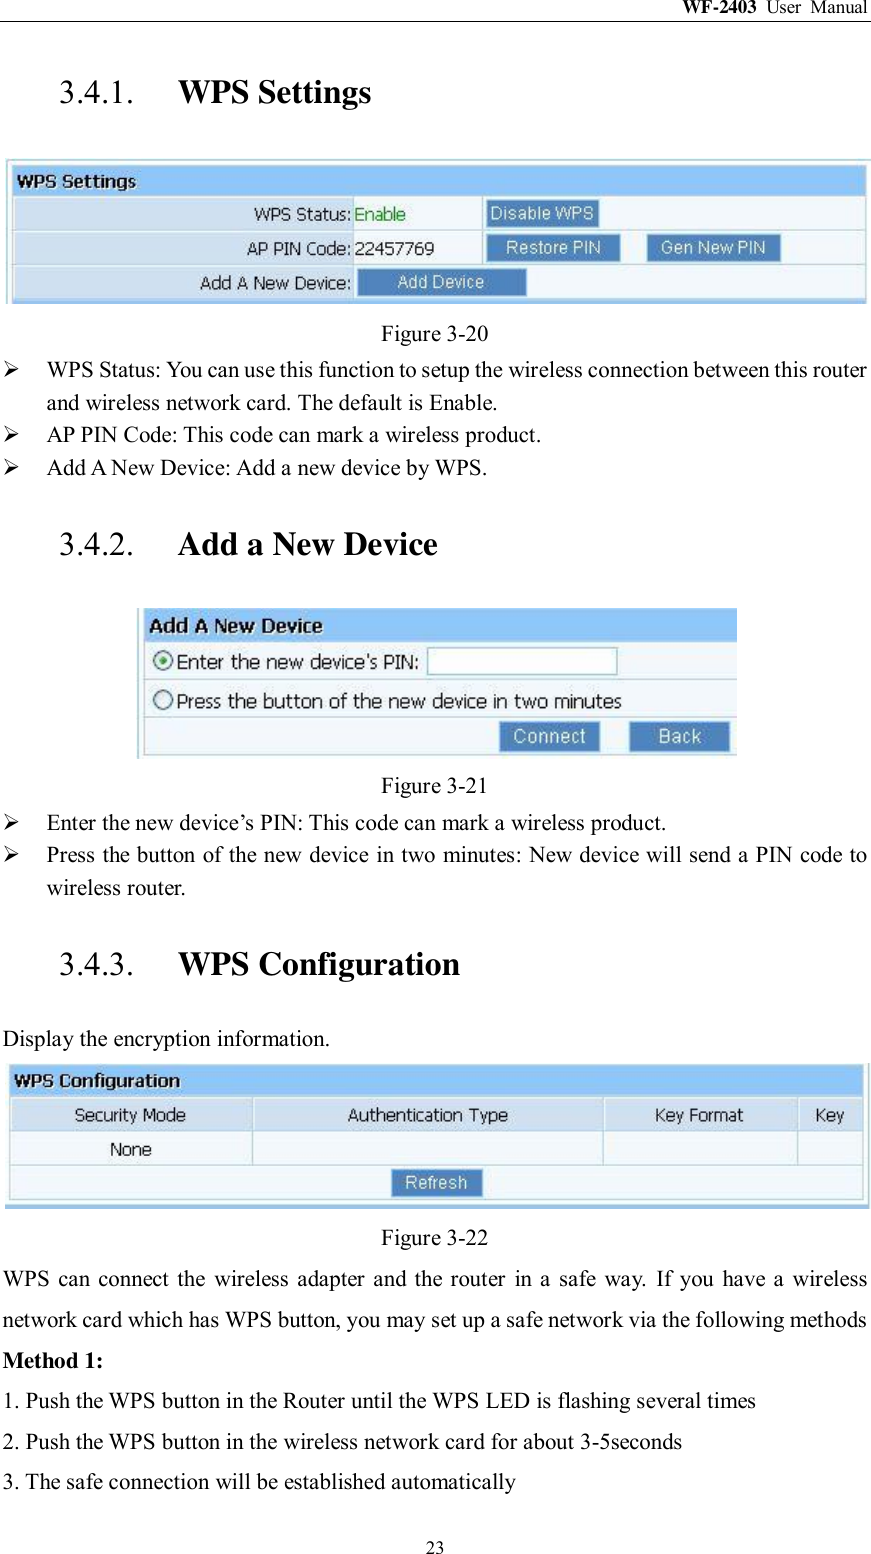 WF-2403  User  Manual  23 3.4.1. WPS Settings  Figure 3-20  WPS Status: You can use this function to setup the wireless connection between this router and wireless network card. The default is Enable.  AP PIN Code: This code can mark a wireless product.  Add A New Device: Add a new device by WPS. 3.4.2. Add a New Device  Figure 3-21  Enter the new device‟s PIN: This code can mark a wireless product.  Press the button of the new device in two minutes: New device will send a PIN code to wireless router. 3.4.3. WPS Configuration Display the encryption information.  Figure 3-22 WPS  can connect the  wireless  adapter  and  the  router  in  a  safe  way.  If  you  have  a  wireless network card which has WPS button, you may set up a safe network via the following methods Method 1: 1. Push the WPS button in the Router until the WPS LED is flashing several times 2. Push the WPS button in the wireless network card for about 3-5seconds 3. The safe connection will be established automatically 